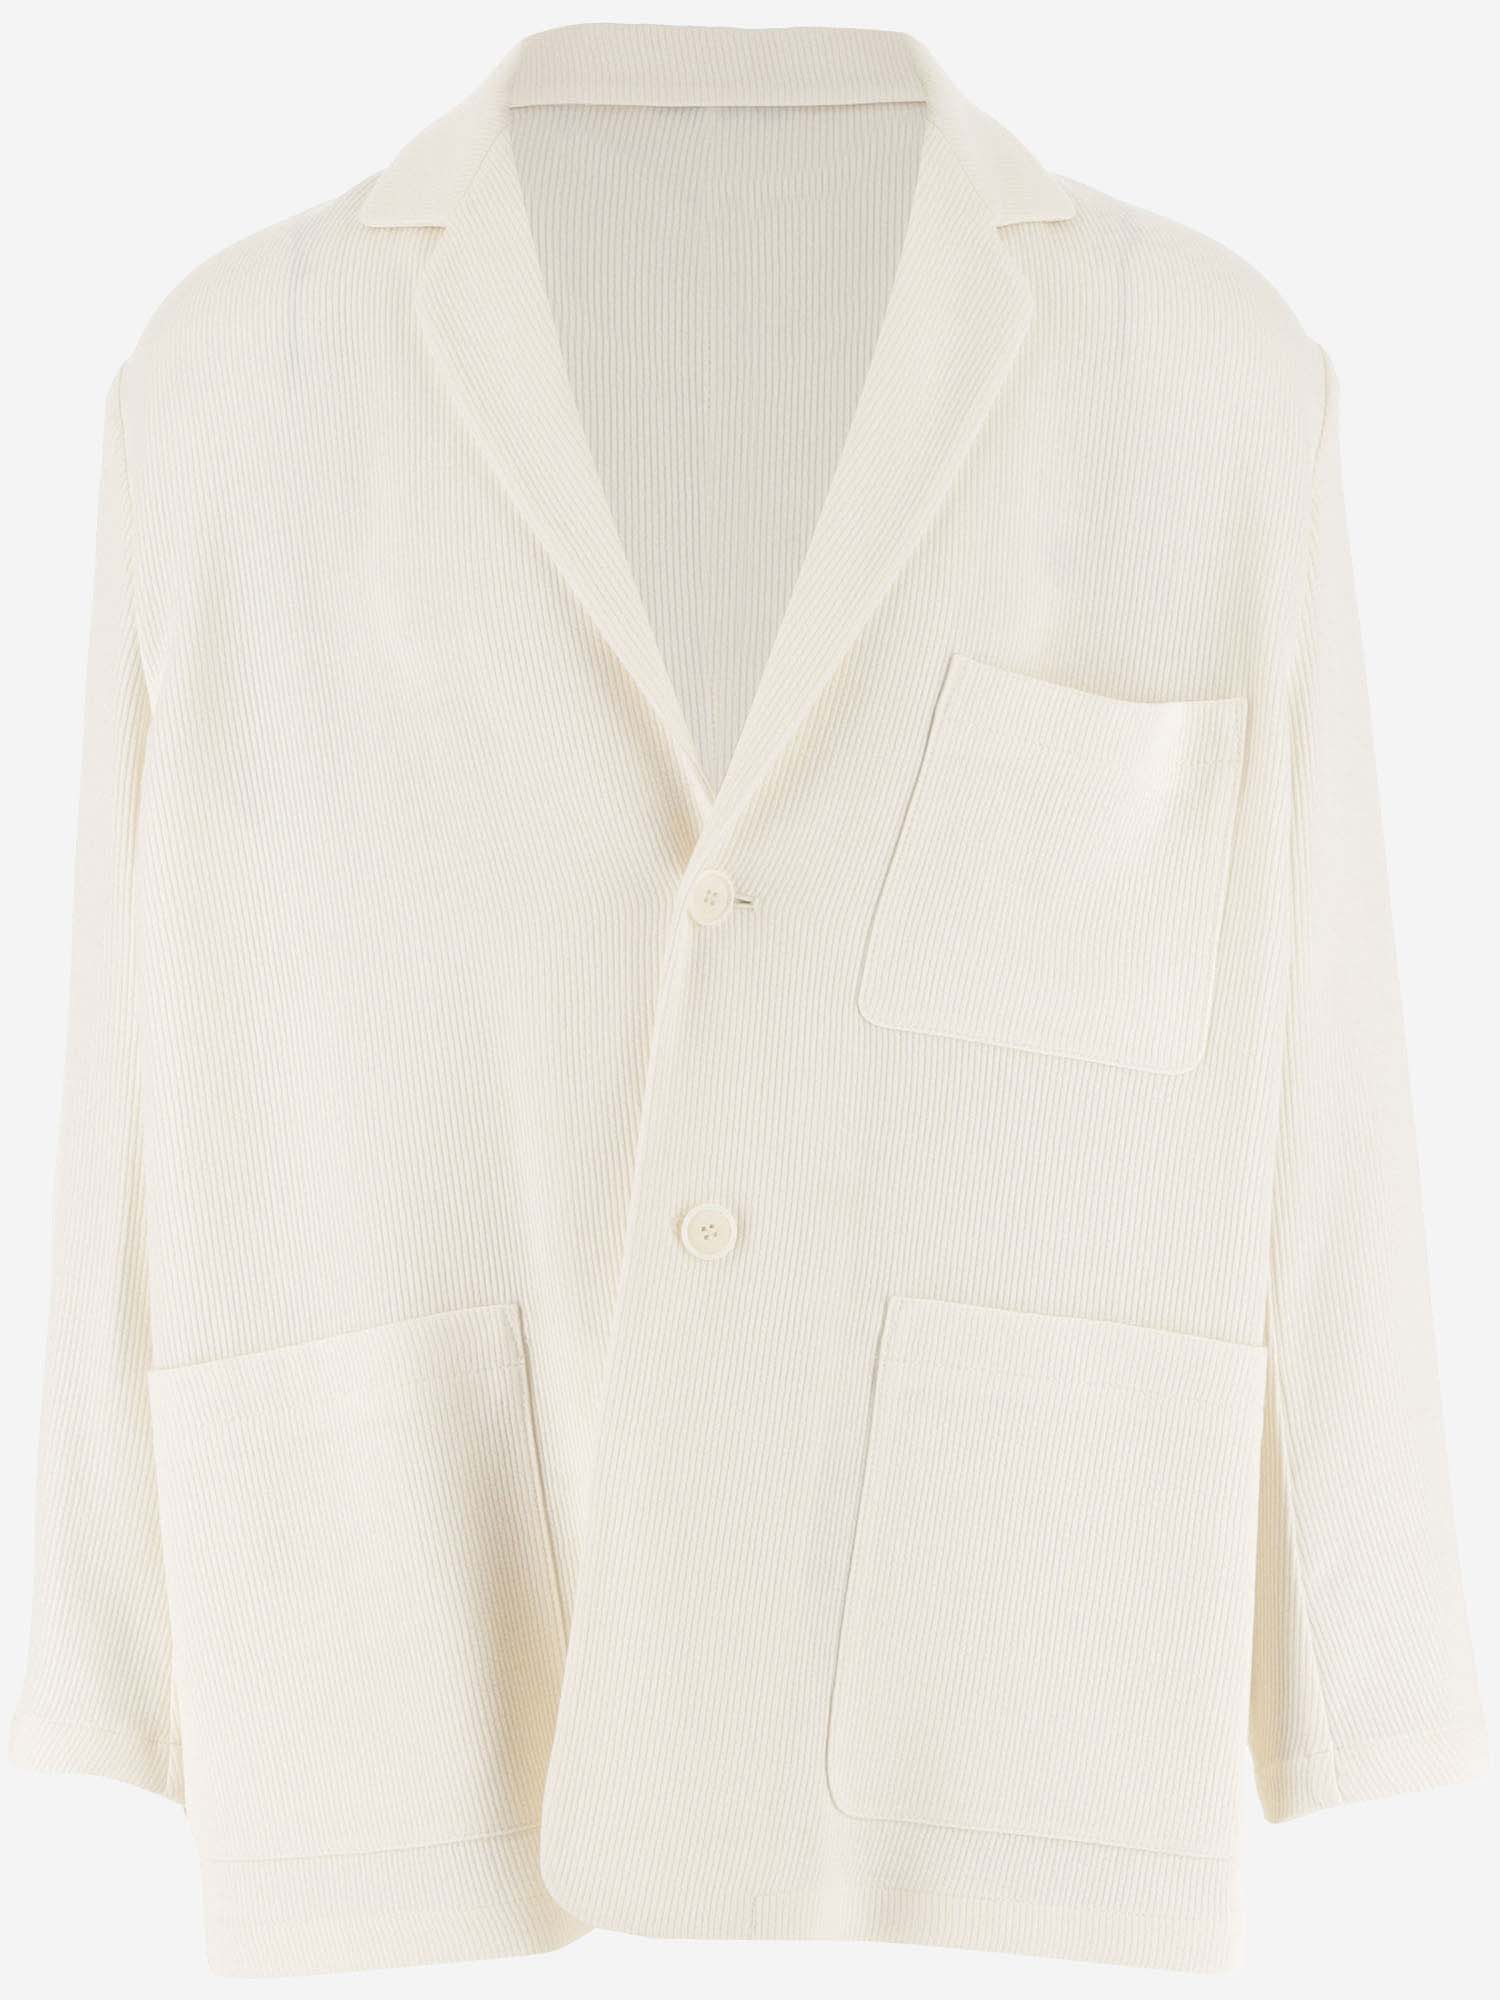 Shop Giorgio Armani Wool And Viscose Blend Jacket In White